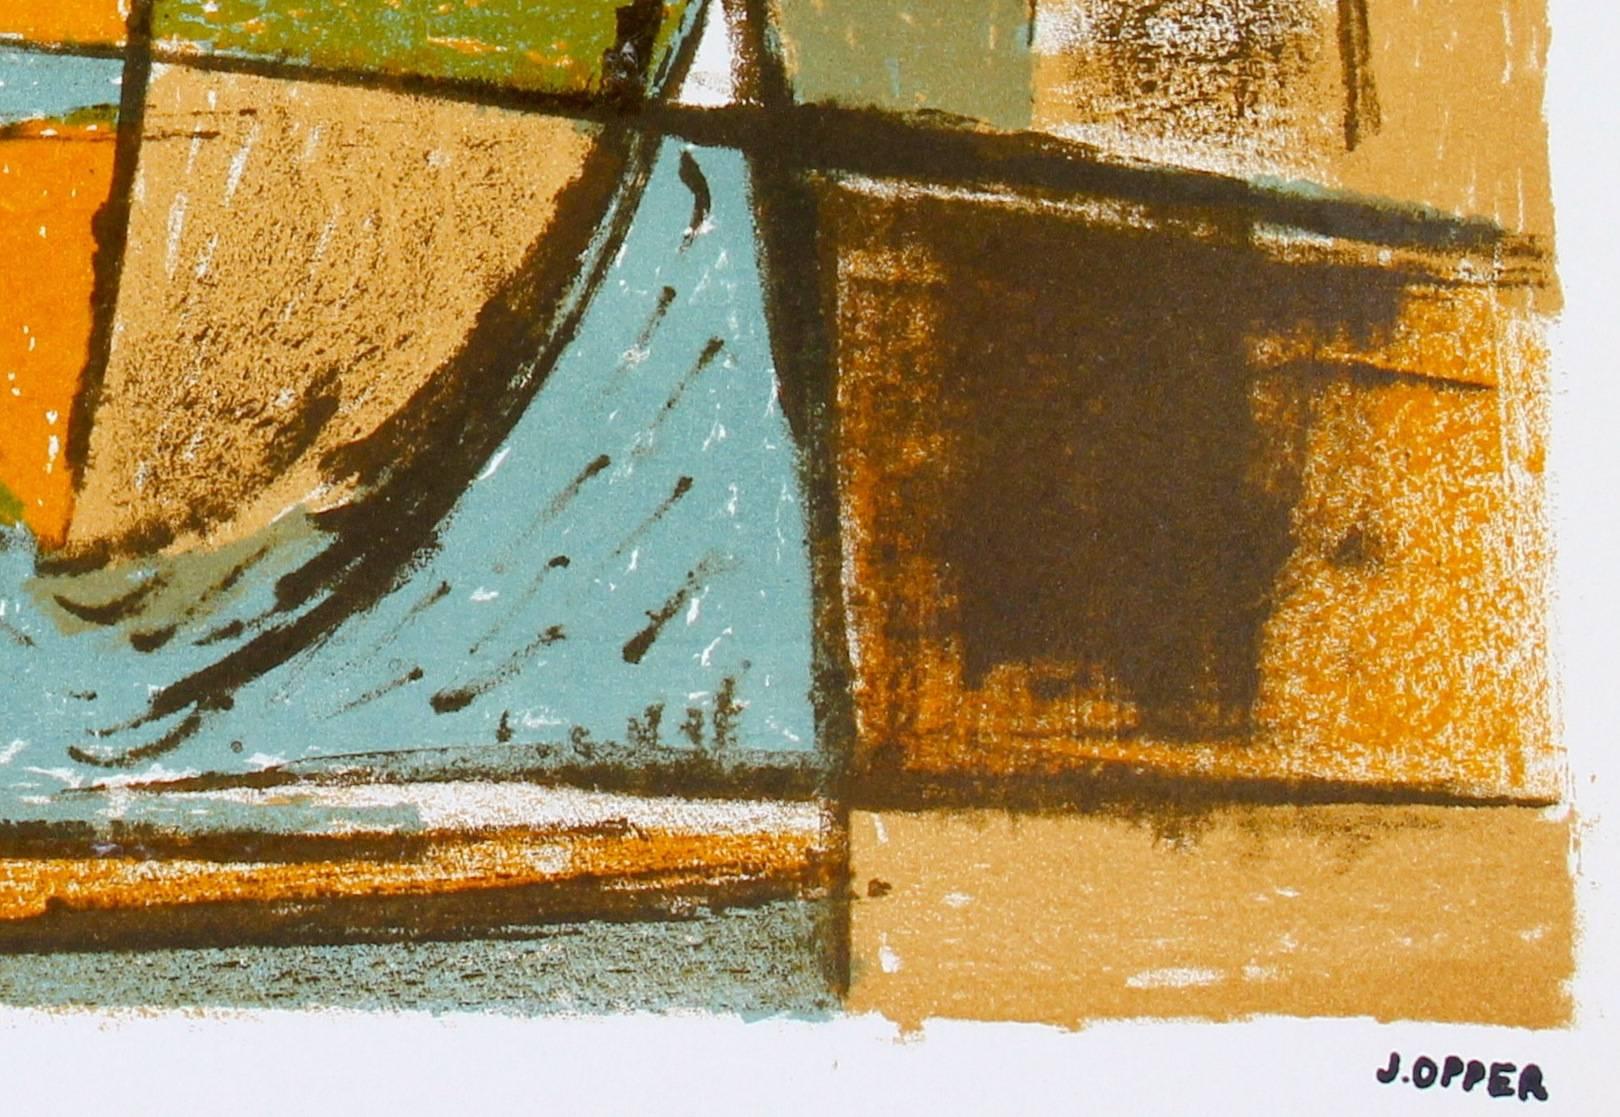 Mid Century Modern Abstract in Ochre and Blue, Lithograph - Print by Jerry Opper